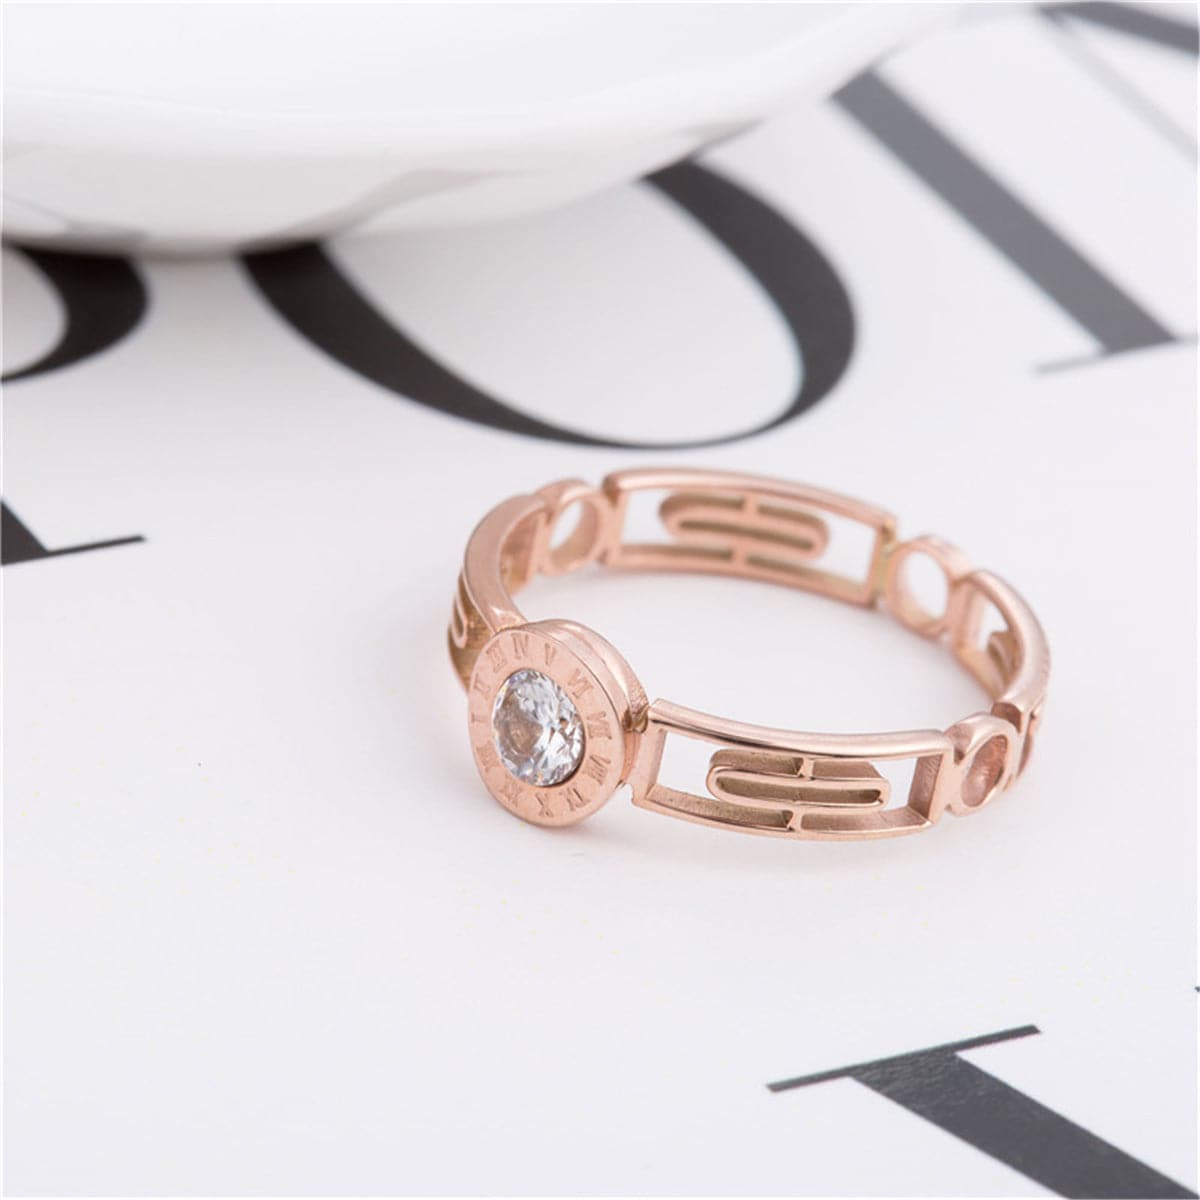 Crystal & 18k Rose Gold-Plated Roman Numeral Ring - streetregion